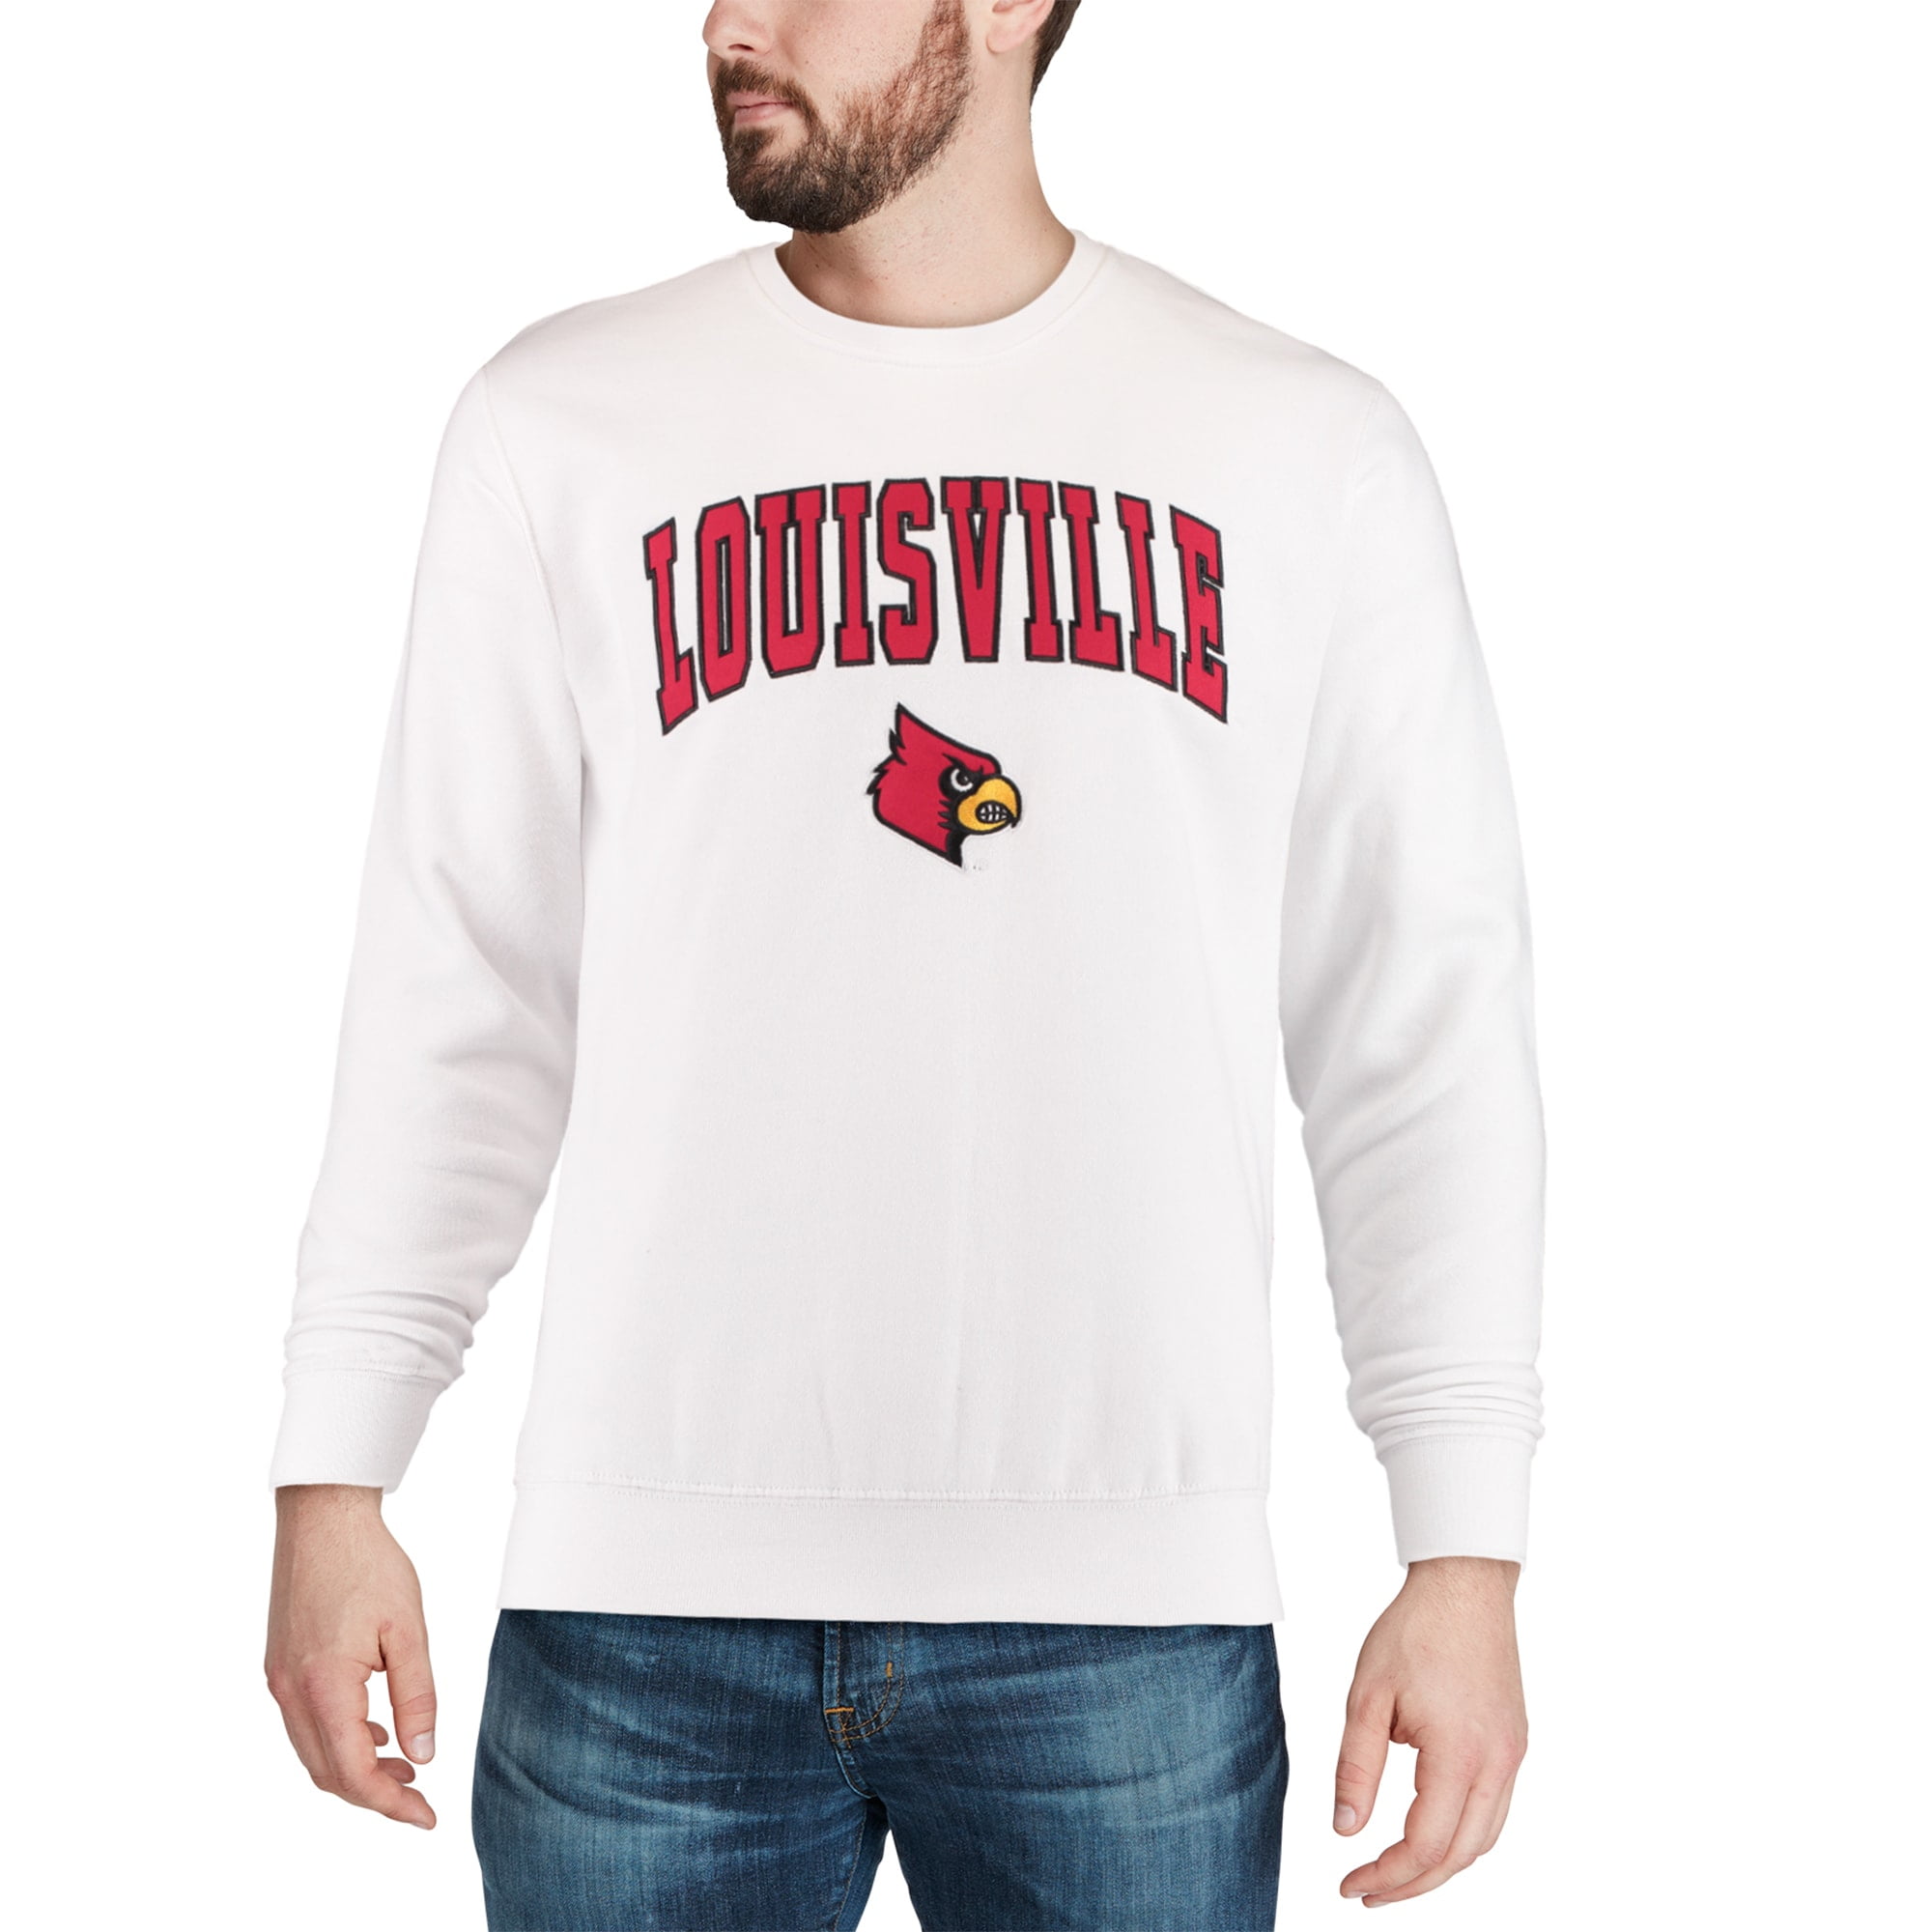 Men's Colosseum Red Louisville Cardinals Sunrise Pullover Hoodie Size: Large